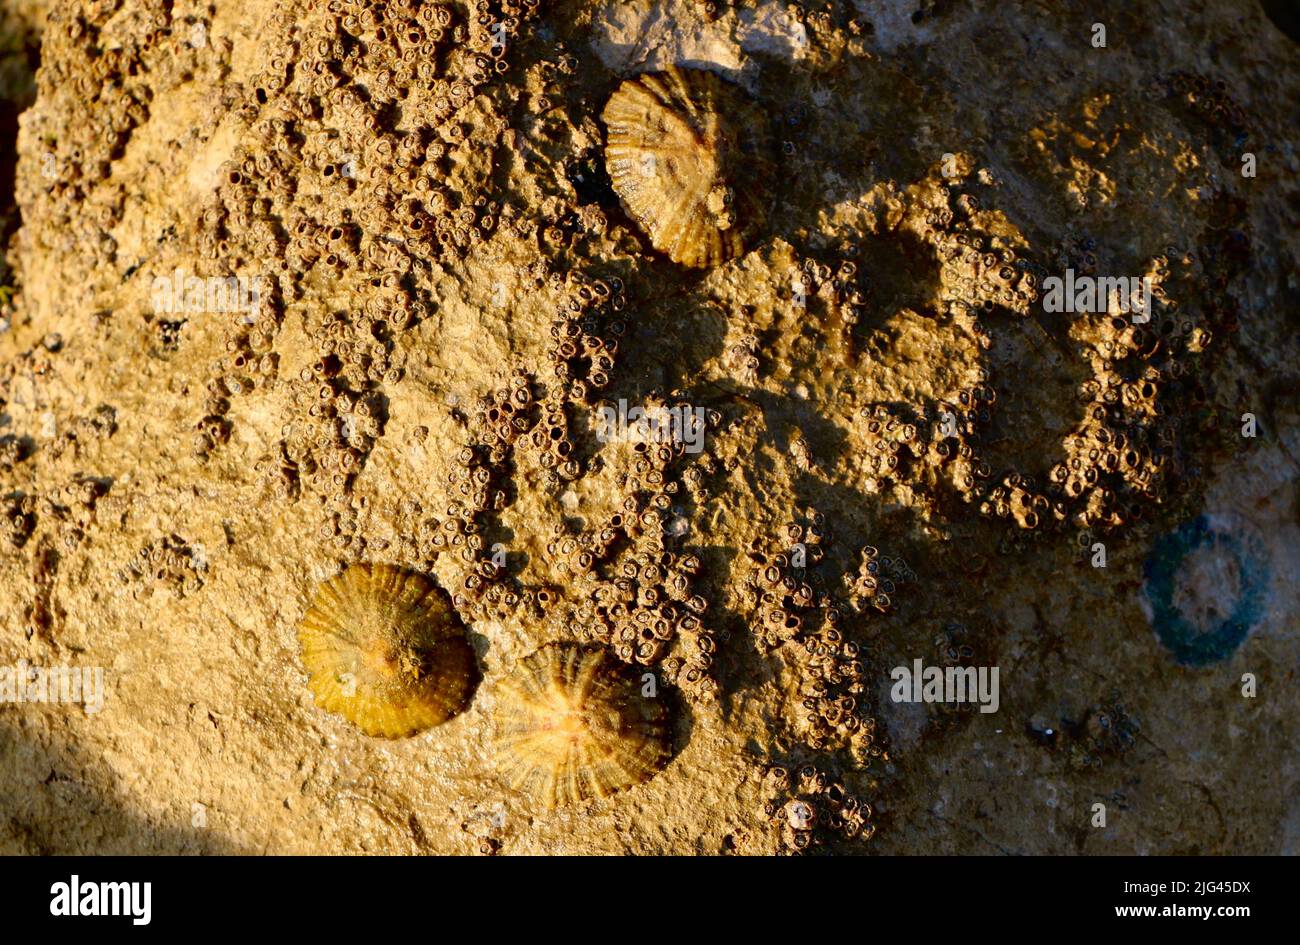 Patella vulgata common European limpets on wet rocks at low tide in early morning summer sunshine Santander Cantabria Spain Stock Photo